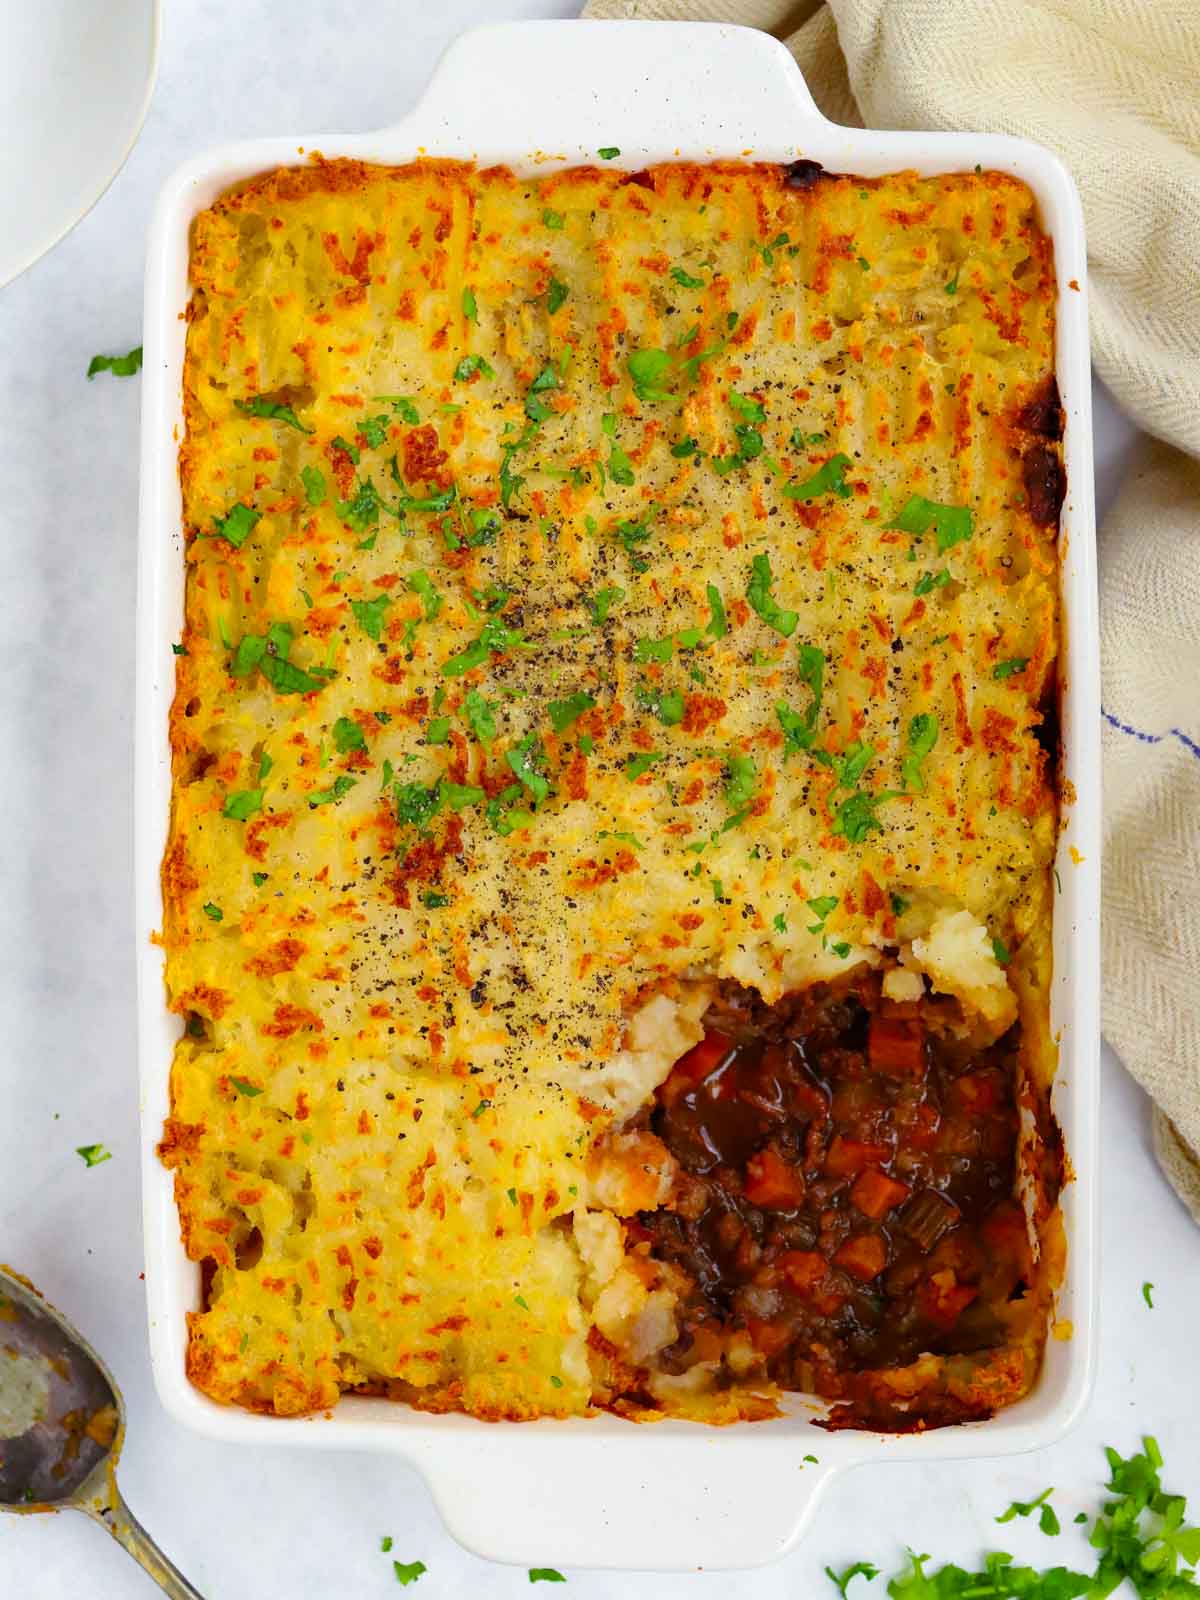 Big cooked shepherd's pie with portion missing.